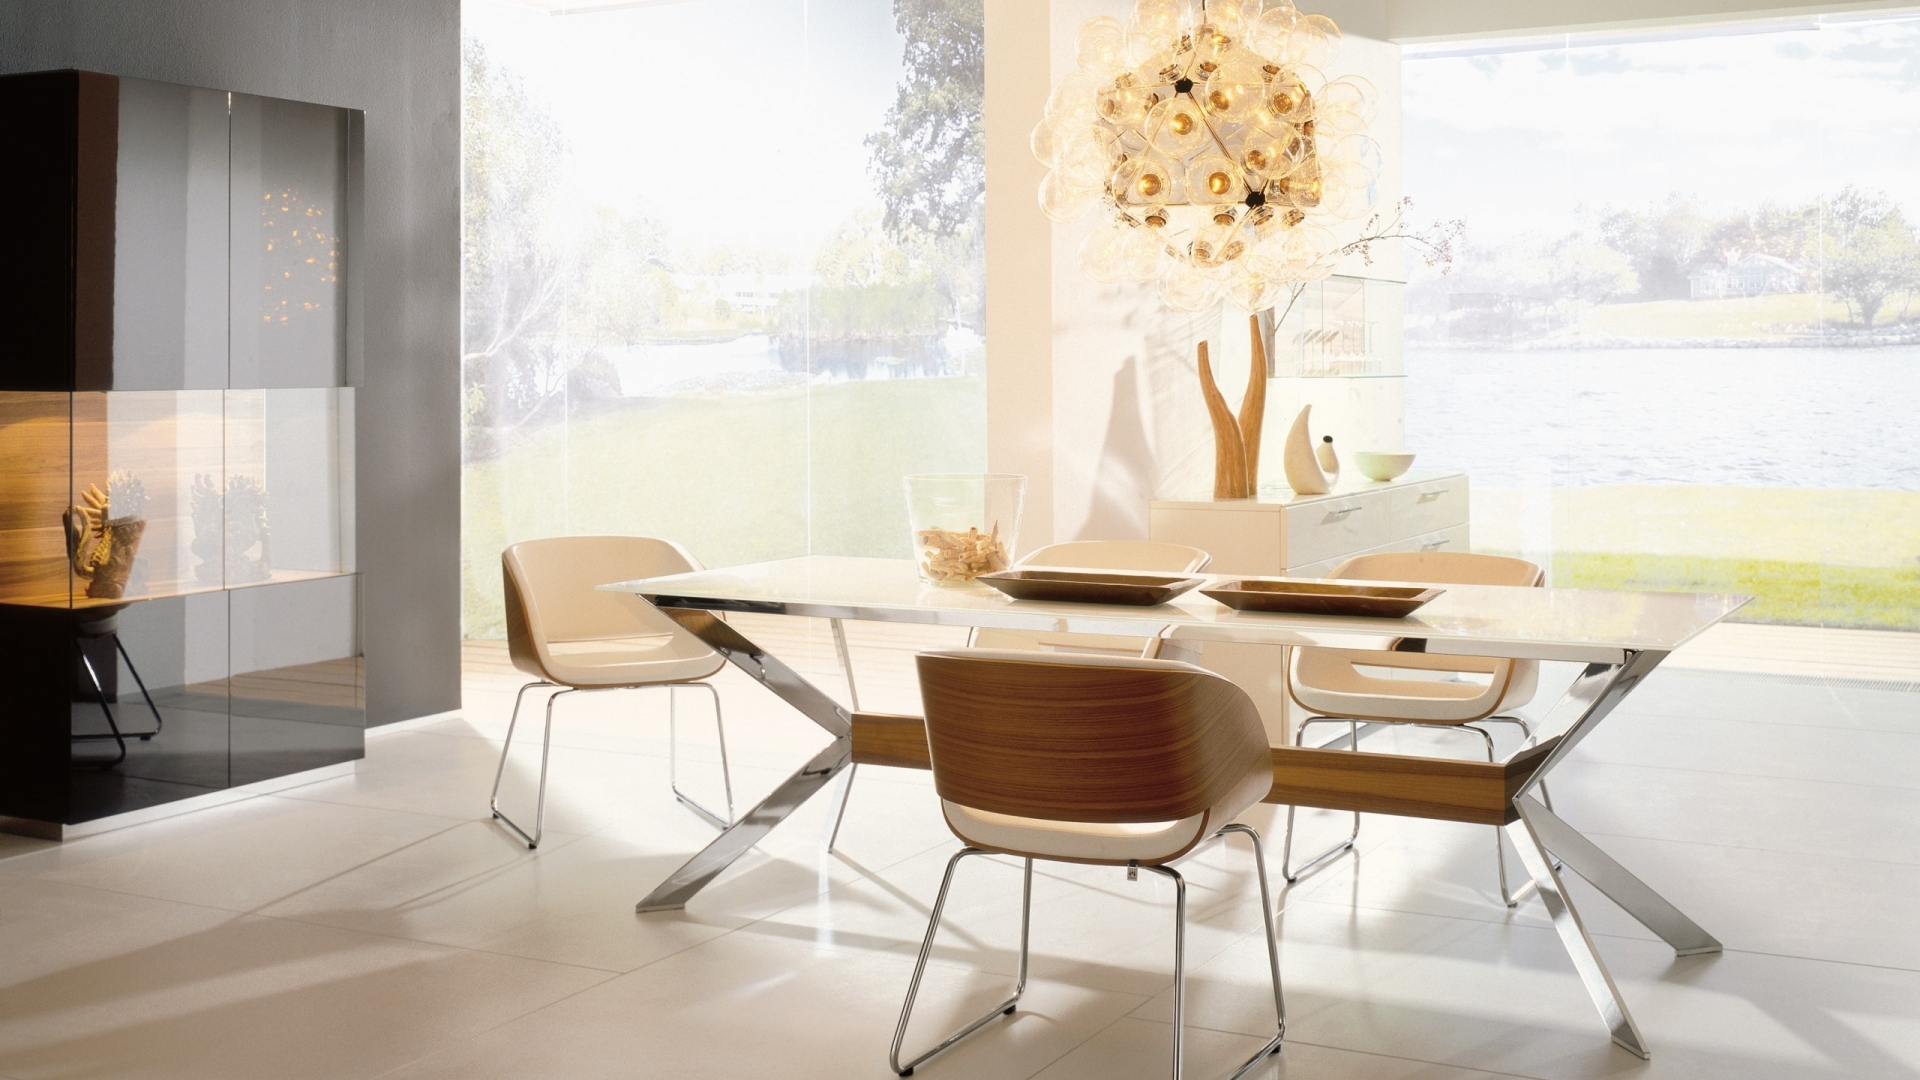 Superb Dinning Area for 1920 x 1080 HDTV 1080p resolution